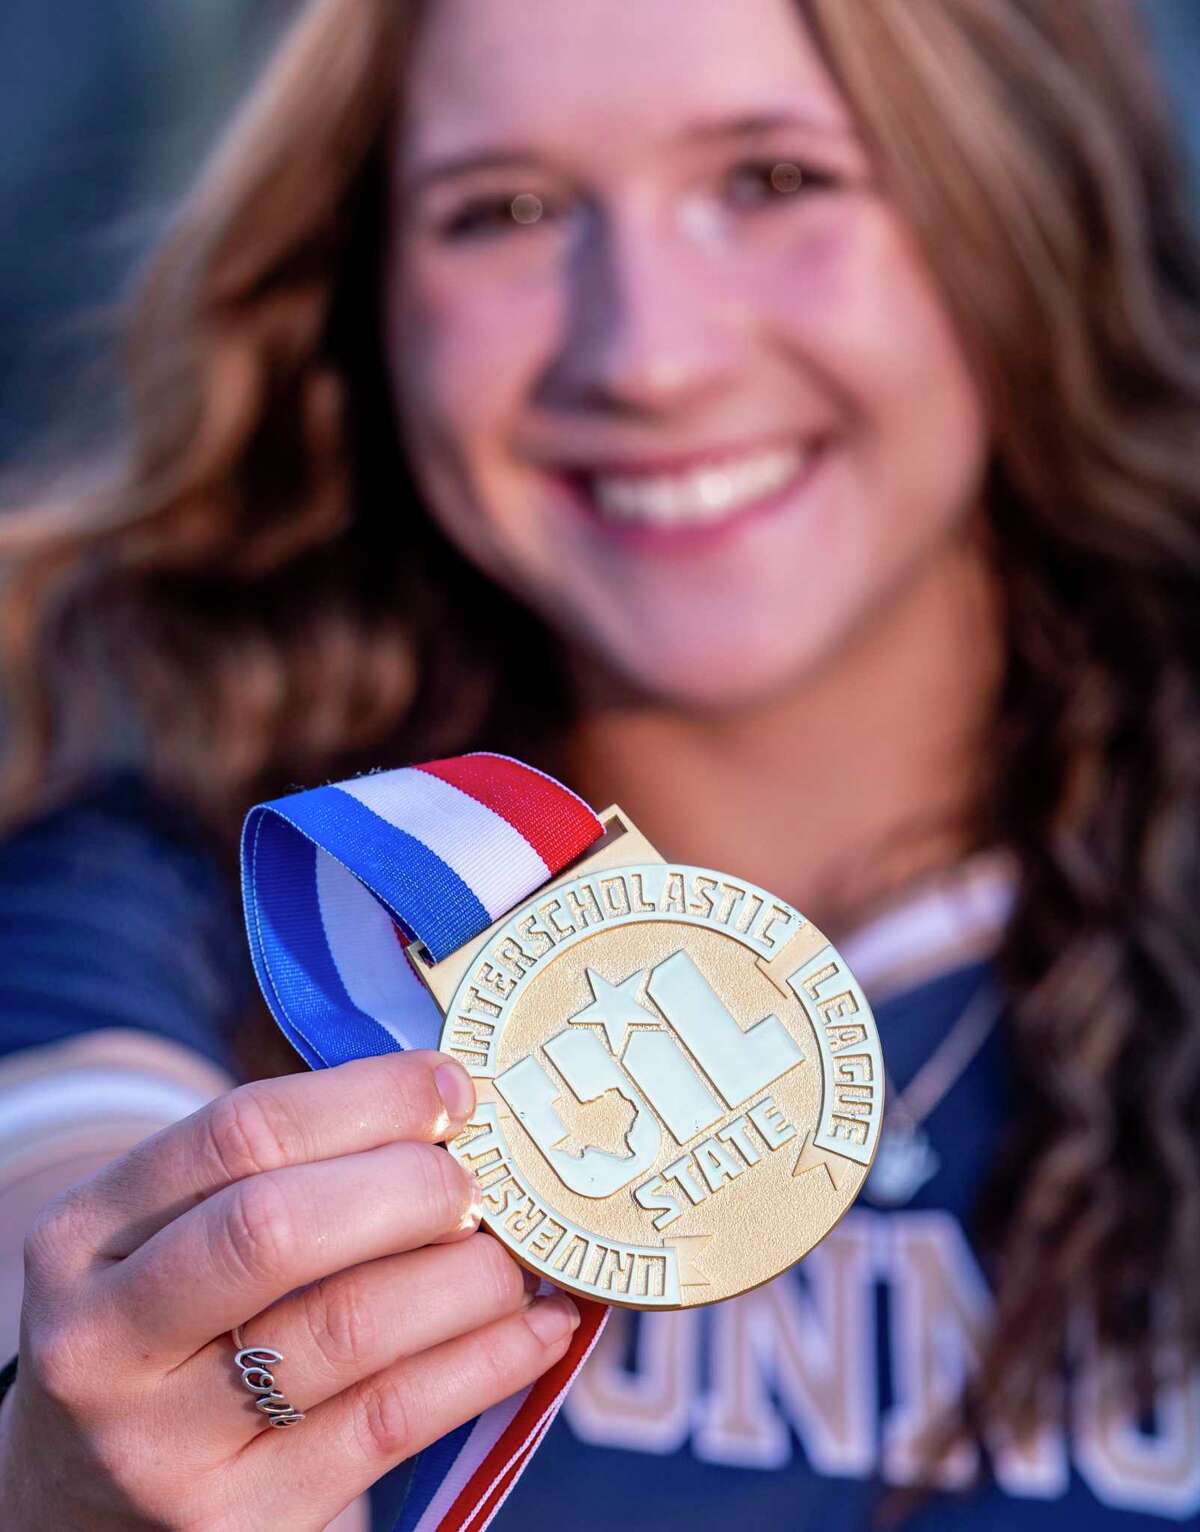 Express-News All-Area softball player of the Year Leighann Goode of O'Connor poses Wednesday, June 15, 2022 at O’Connor with her state championship medal.